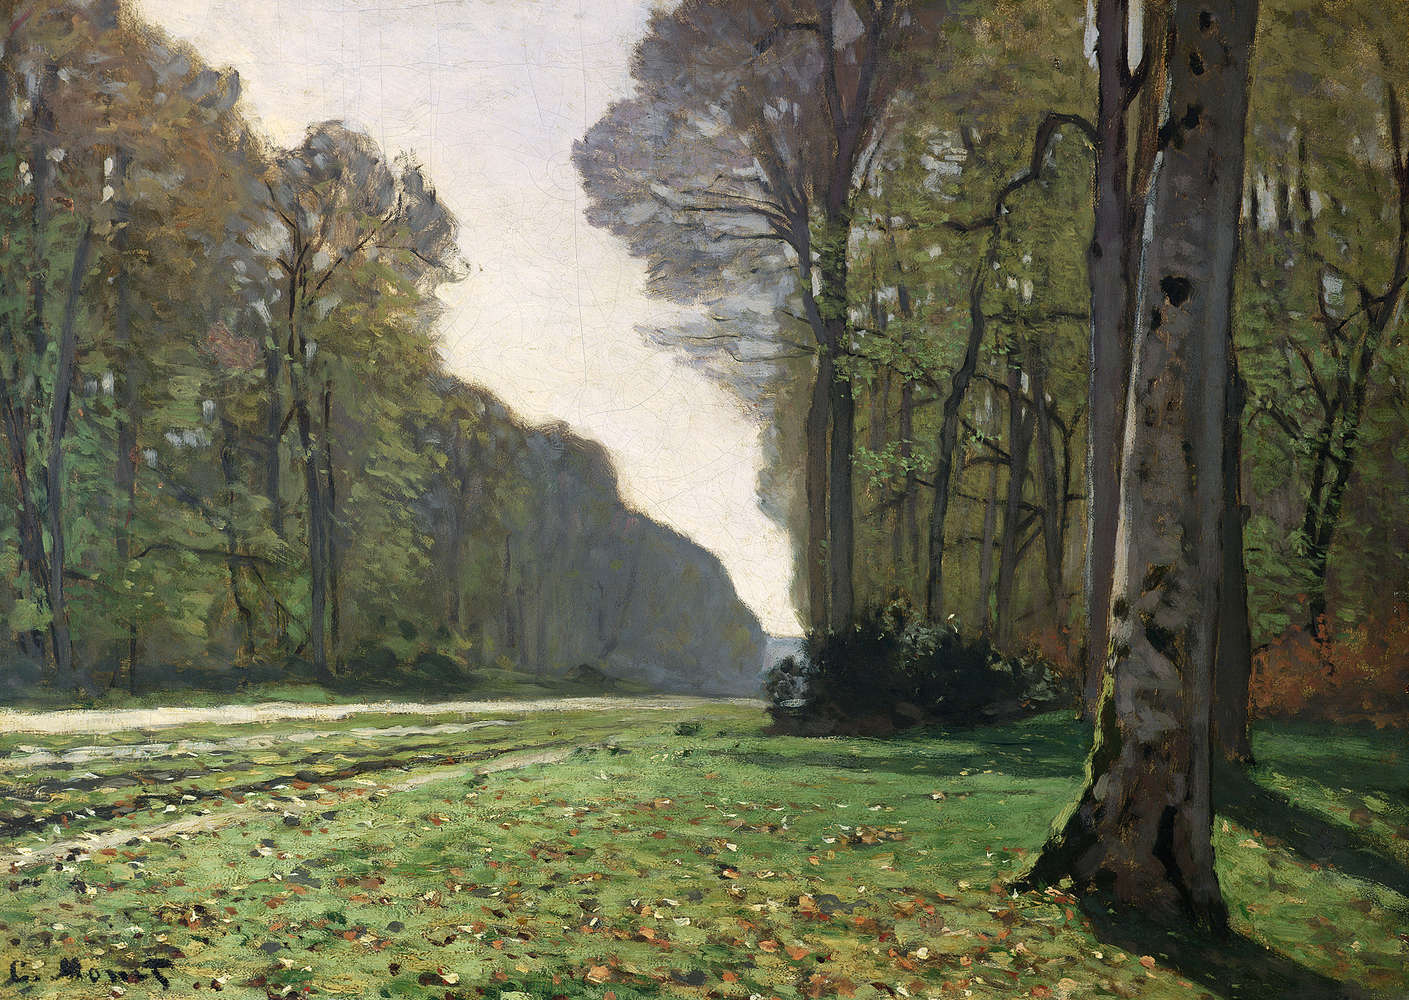             Photo wallpaper "The road to BasBreauFontainebleau" by Claude Monet
        